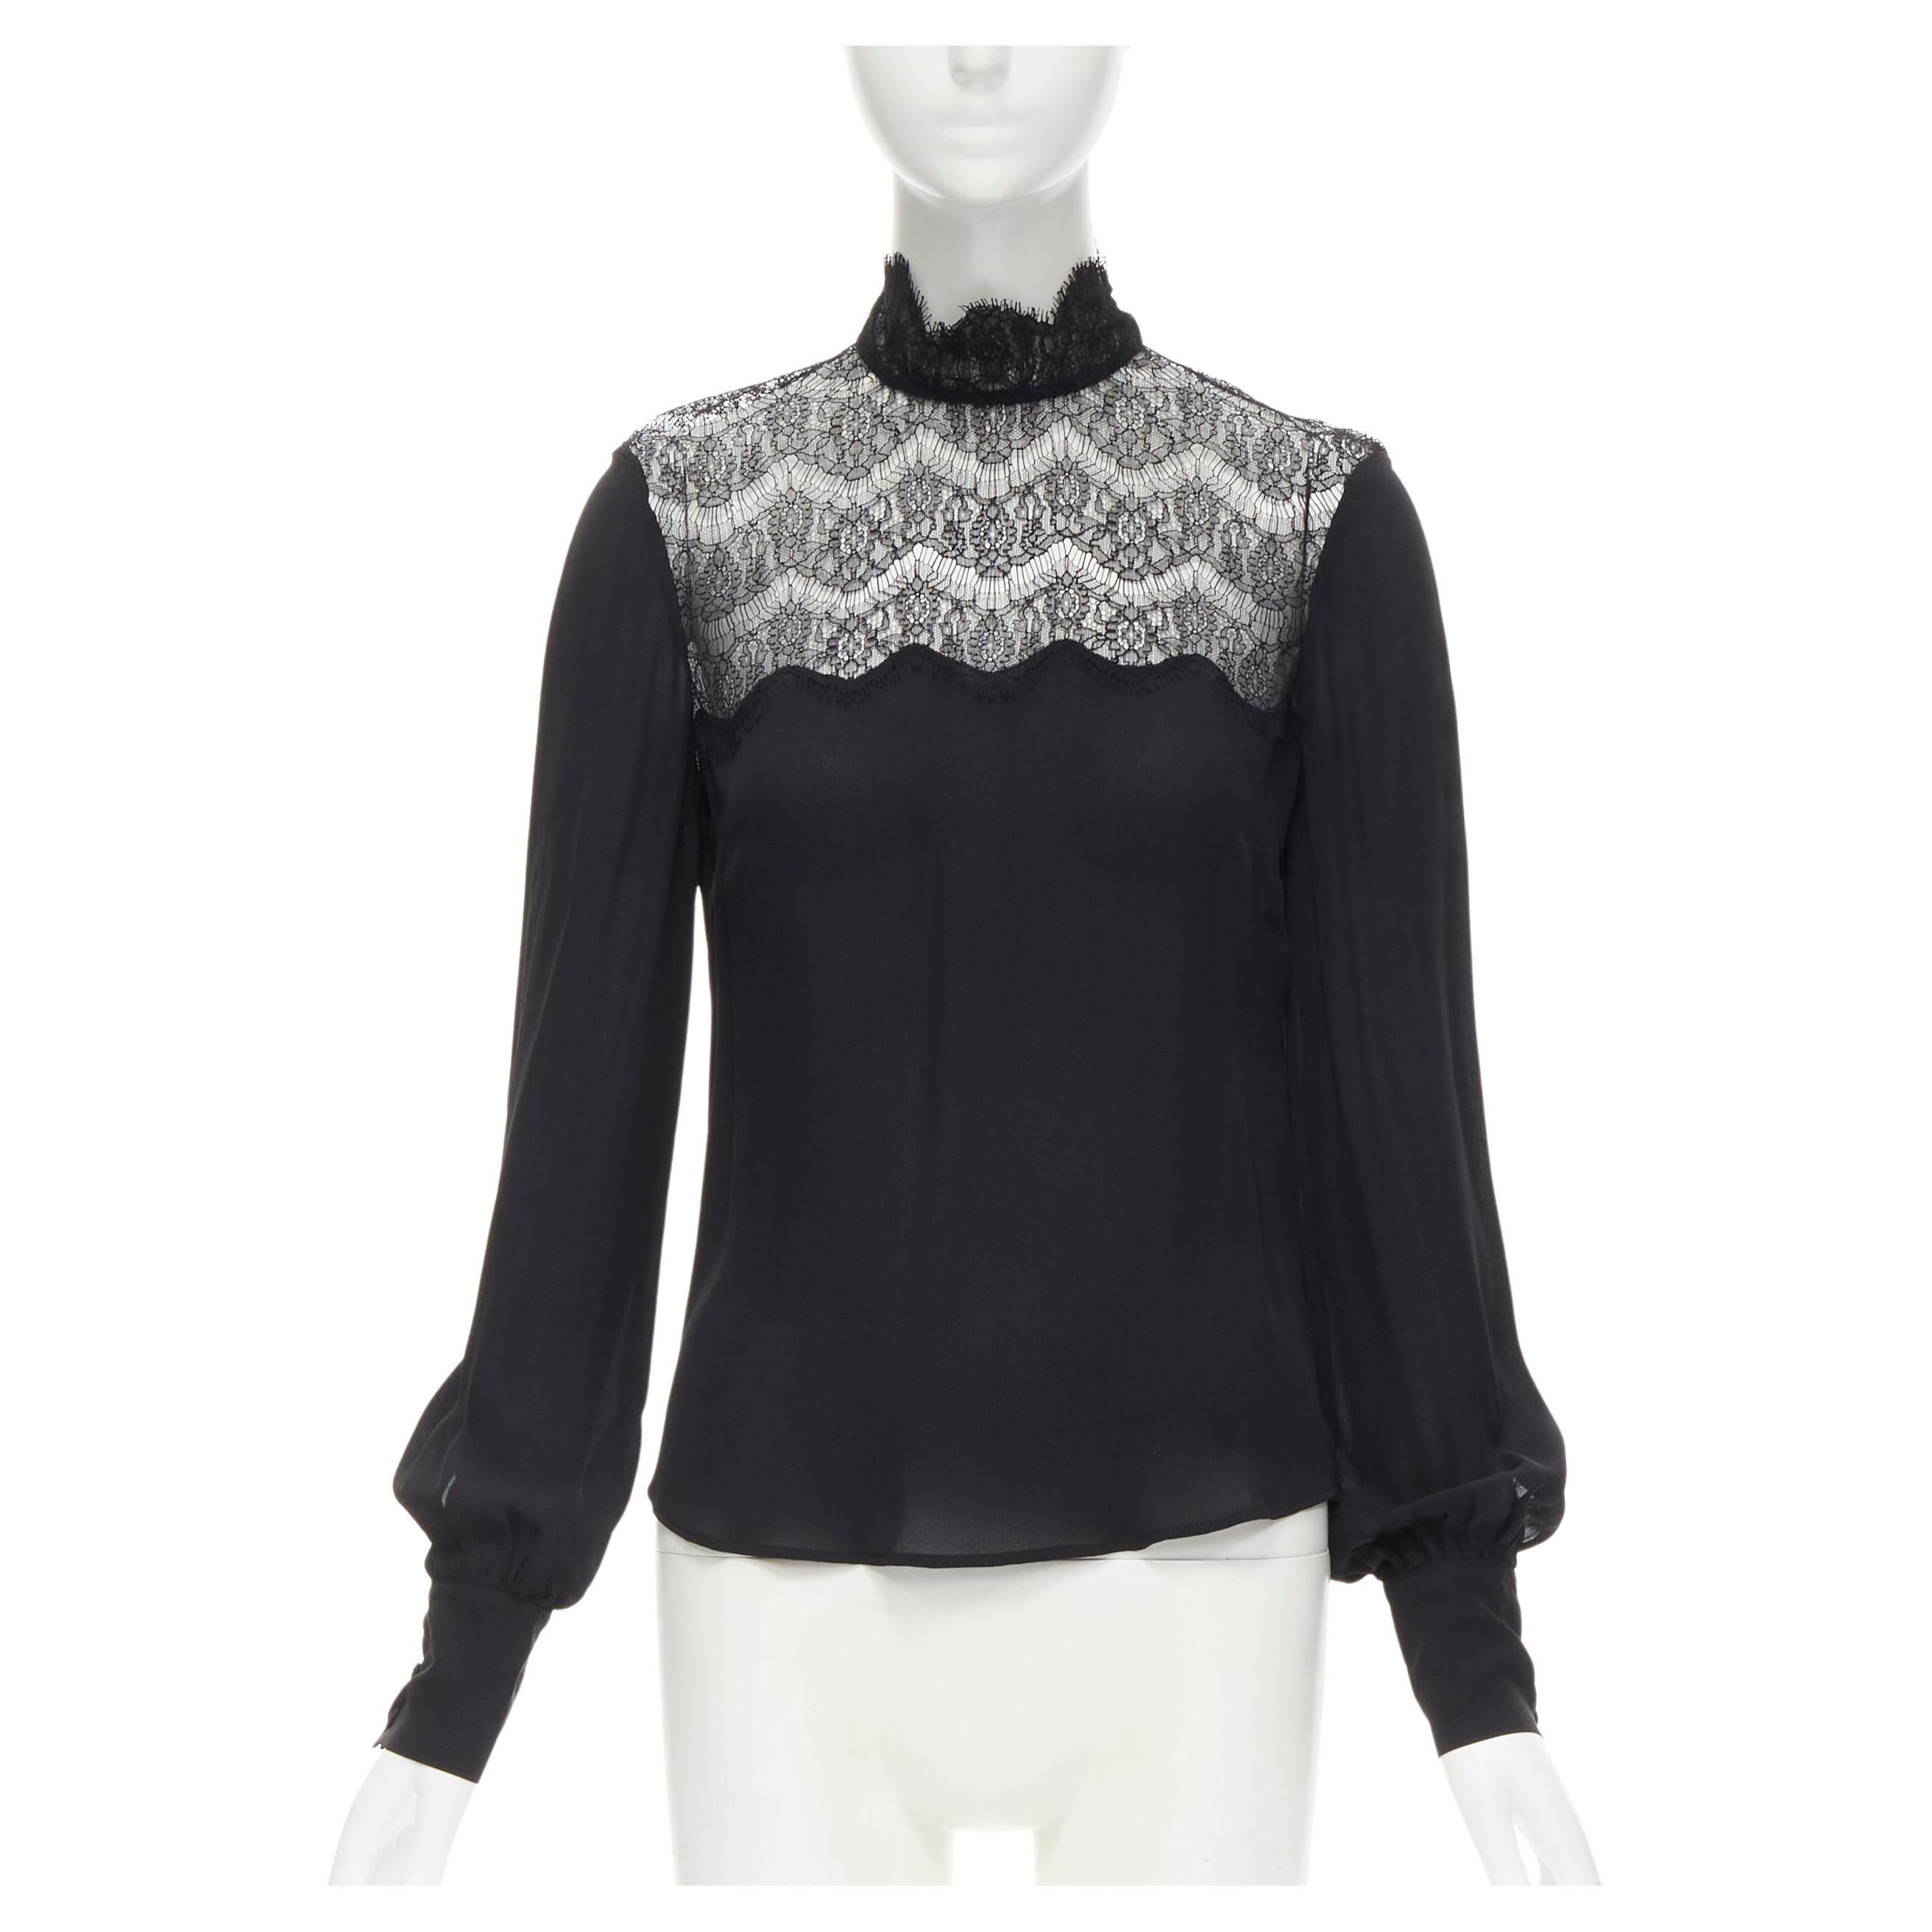 White House black market embroidered mesh top size XS  Black mesh top,  Long sleeve lace tee, Peplum lace top